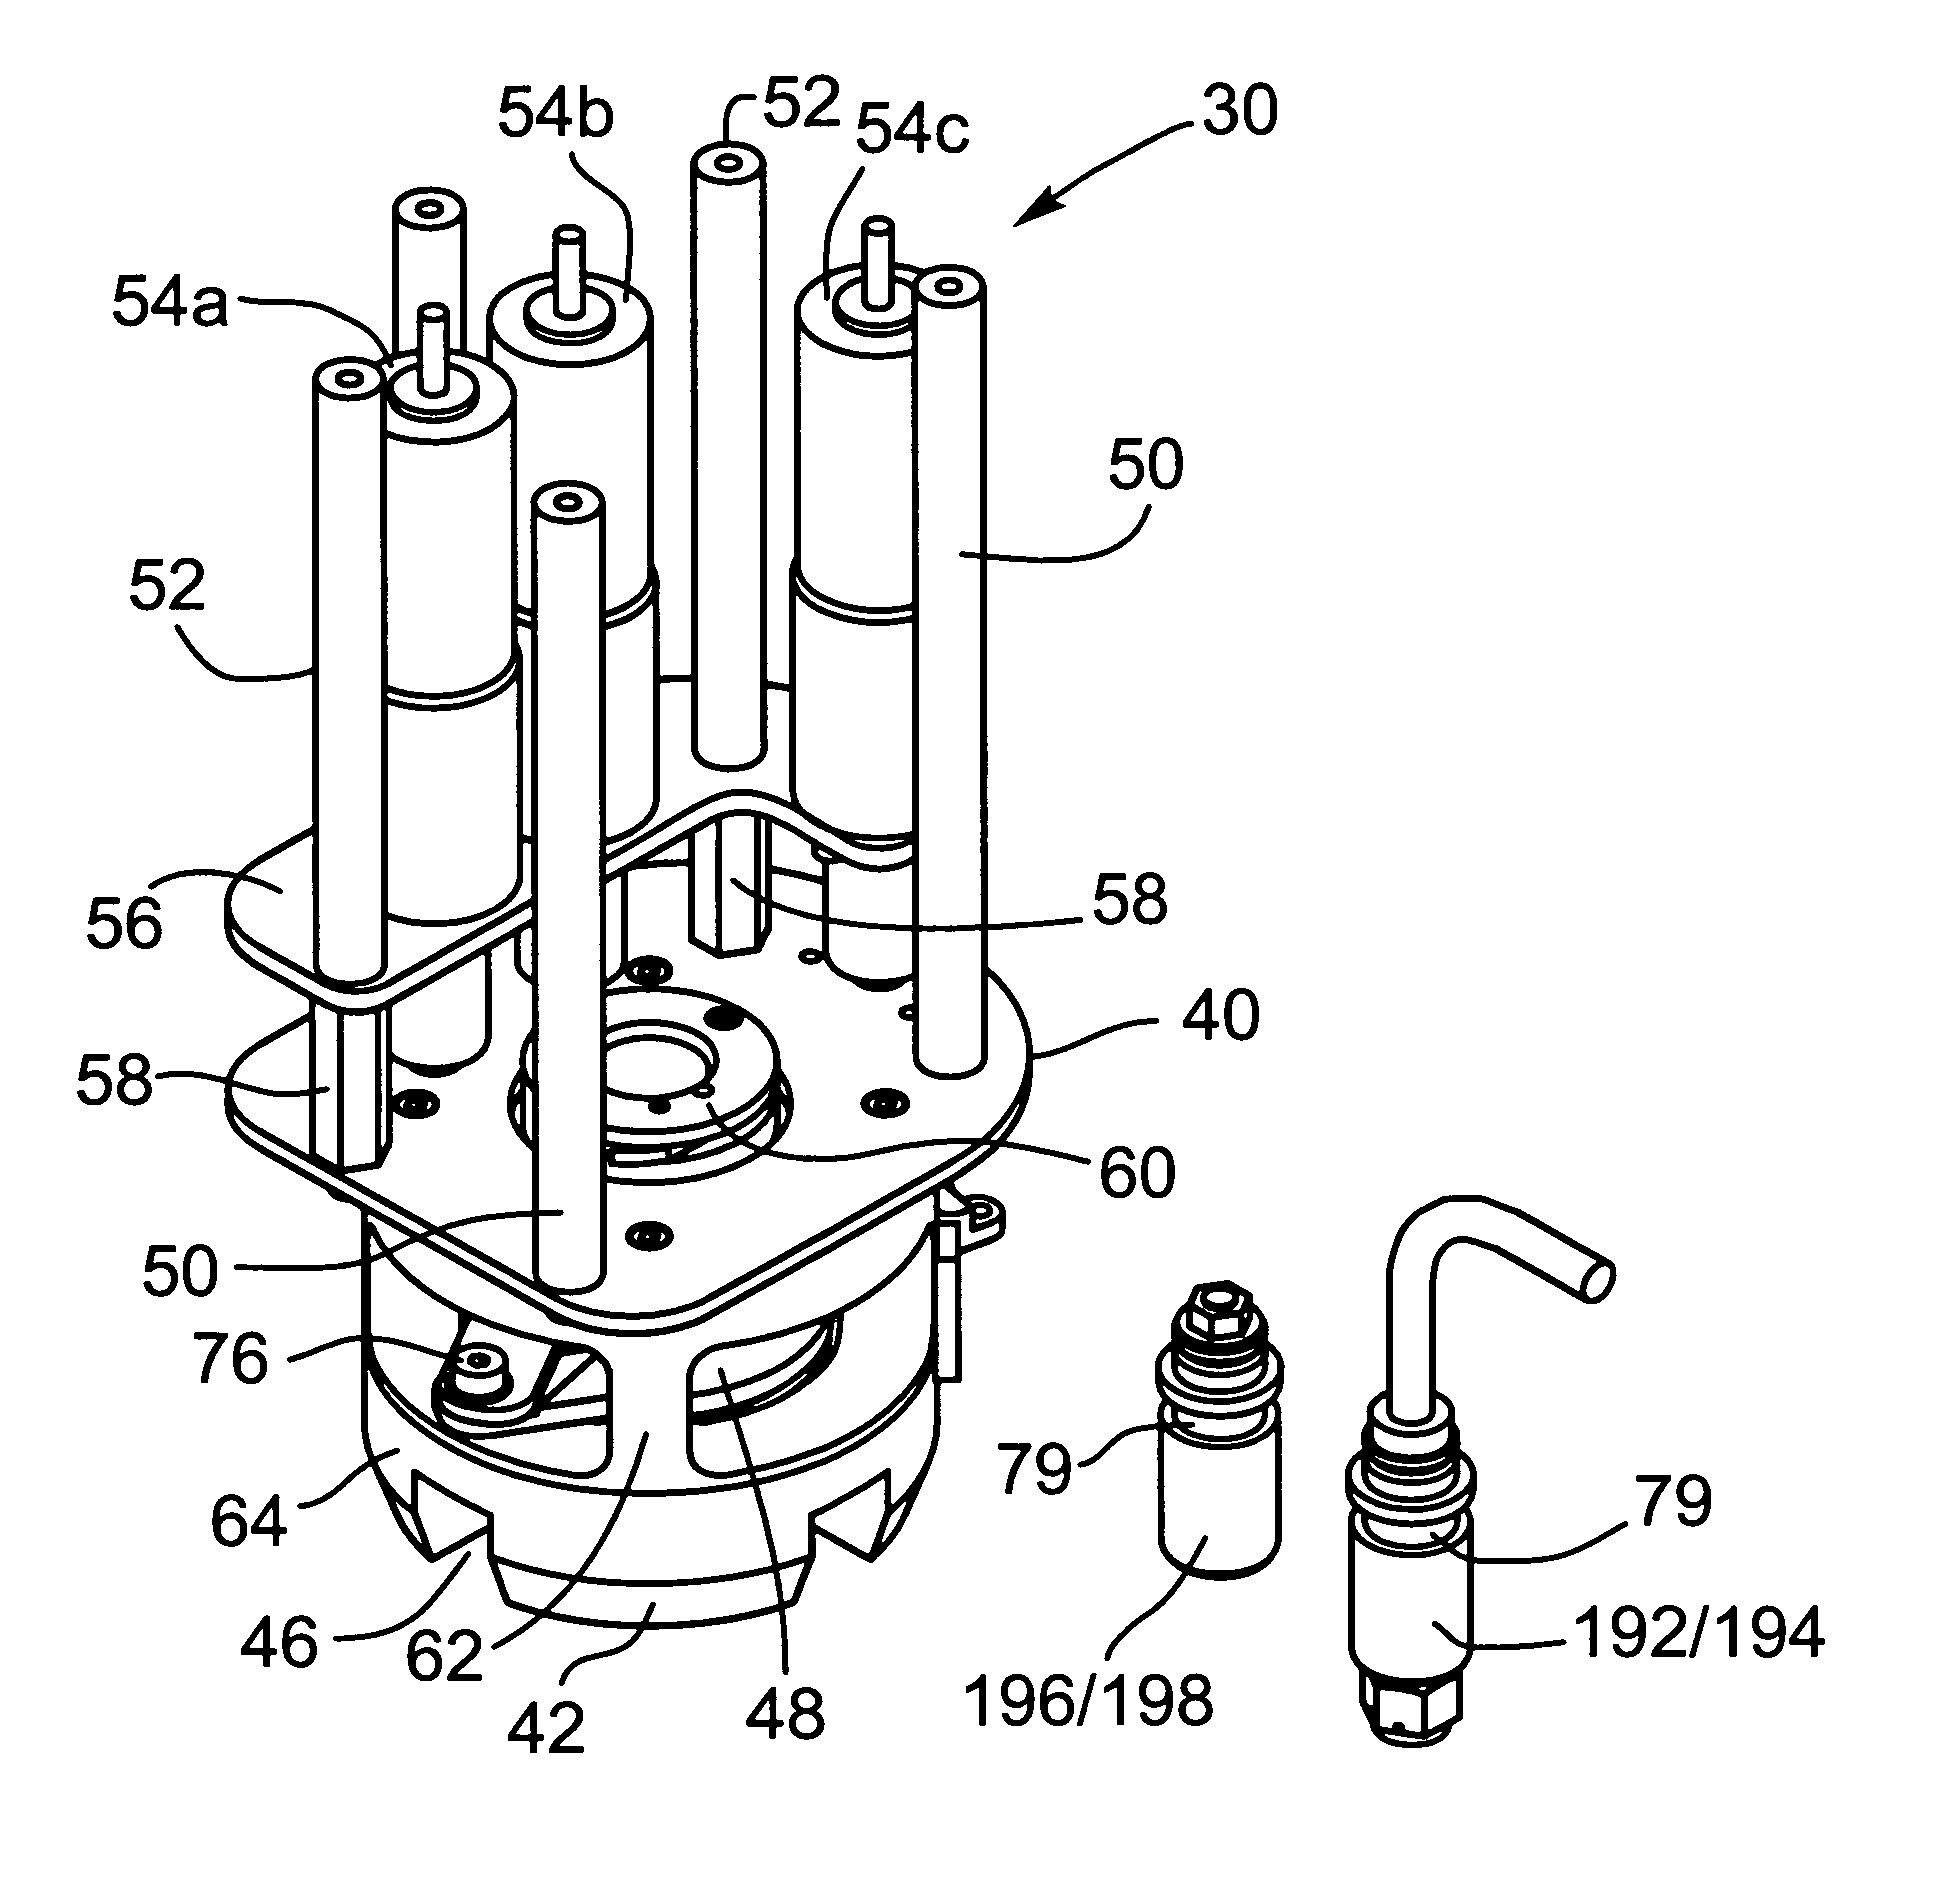 Satellite refuelling system and method